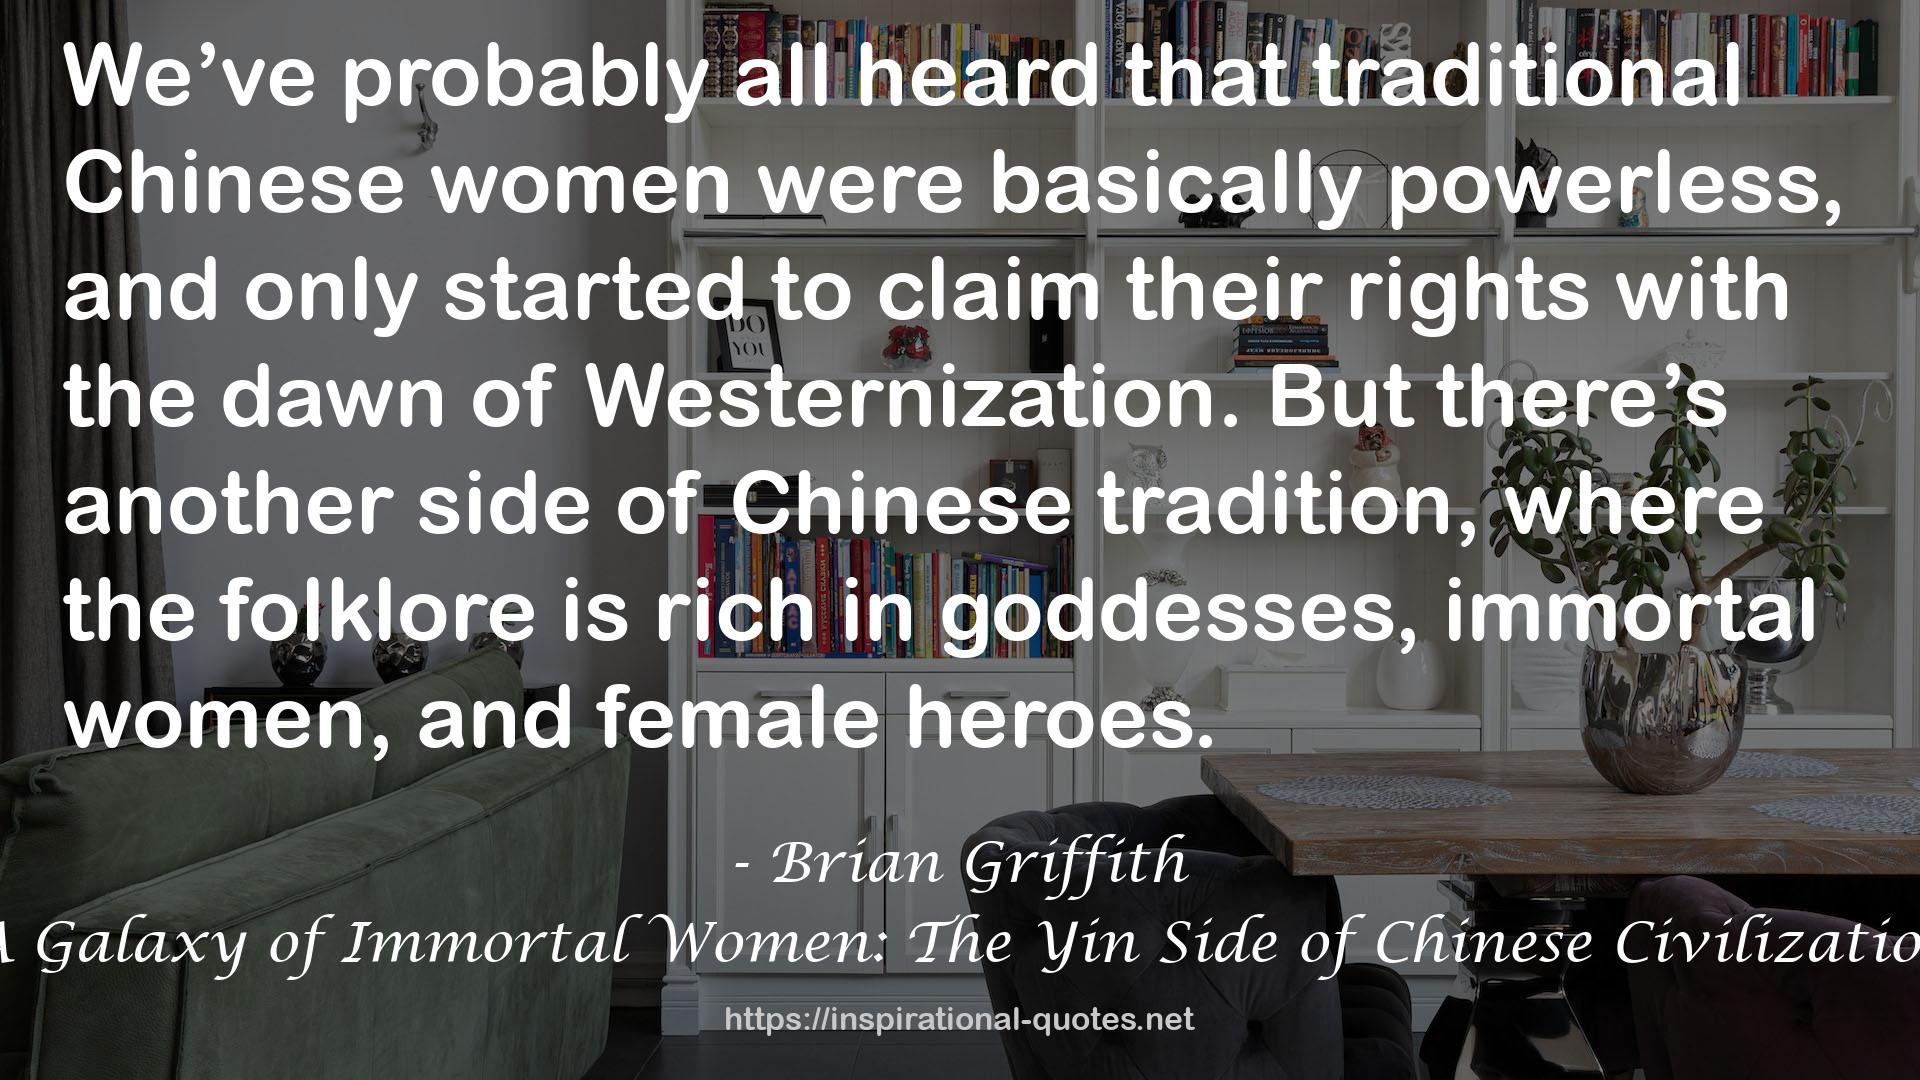 A Galaxy of Immortal Women: The Yin Side of Chinese Civilization QUOTES